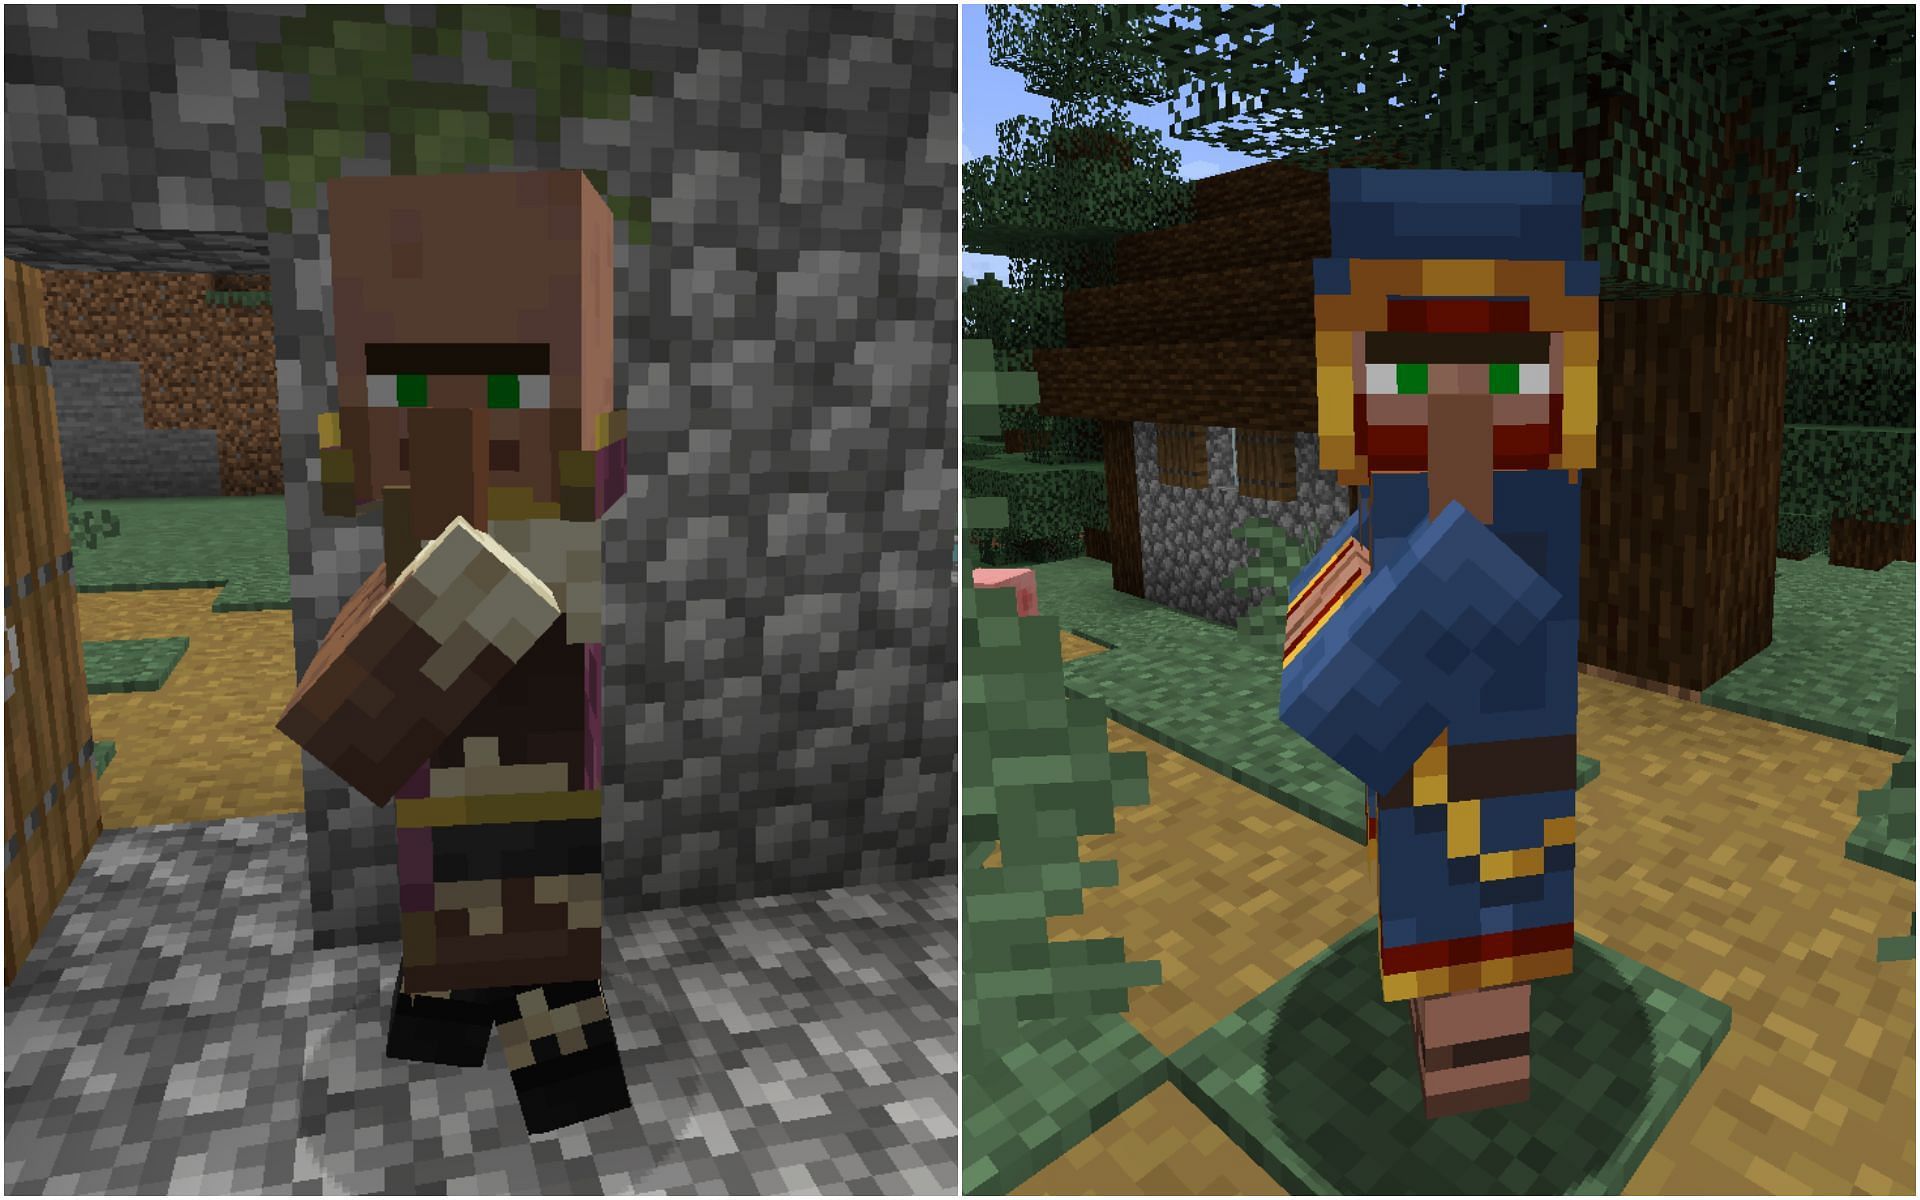 Villager and Wandering trader mobs can give loads of precious items in Minecraft (Image via Sportskeeda)